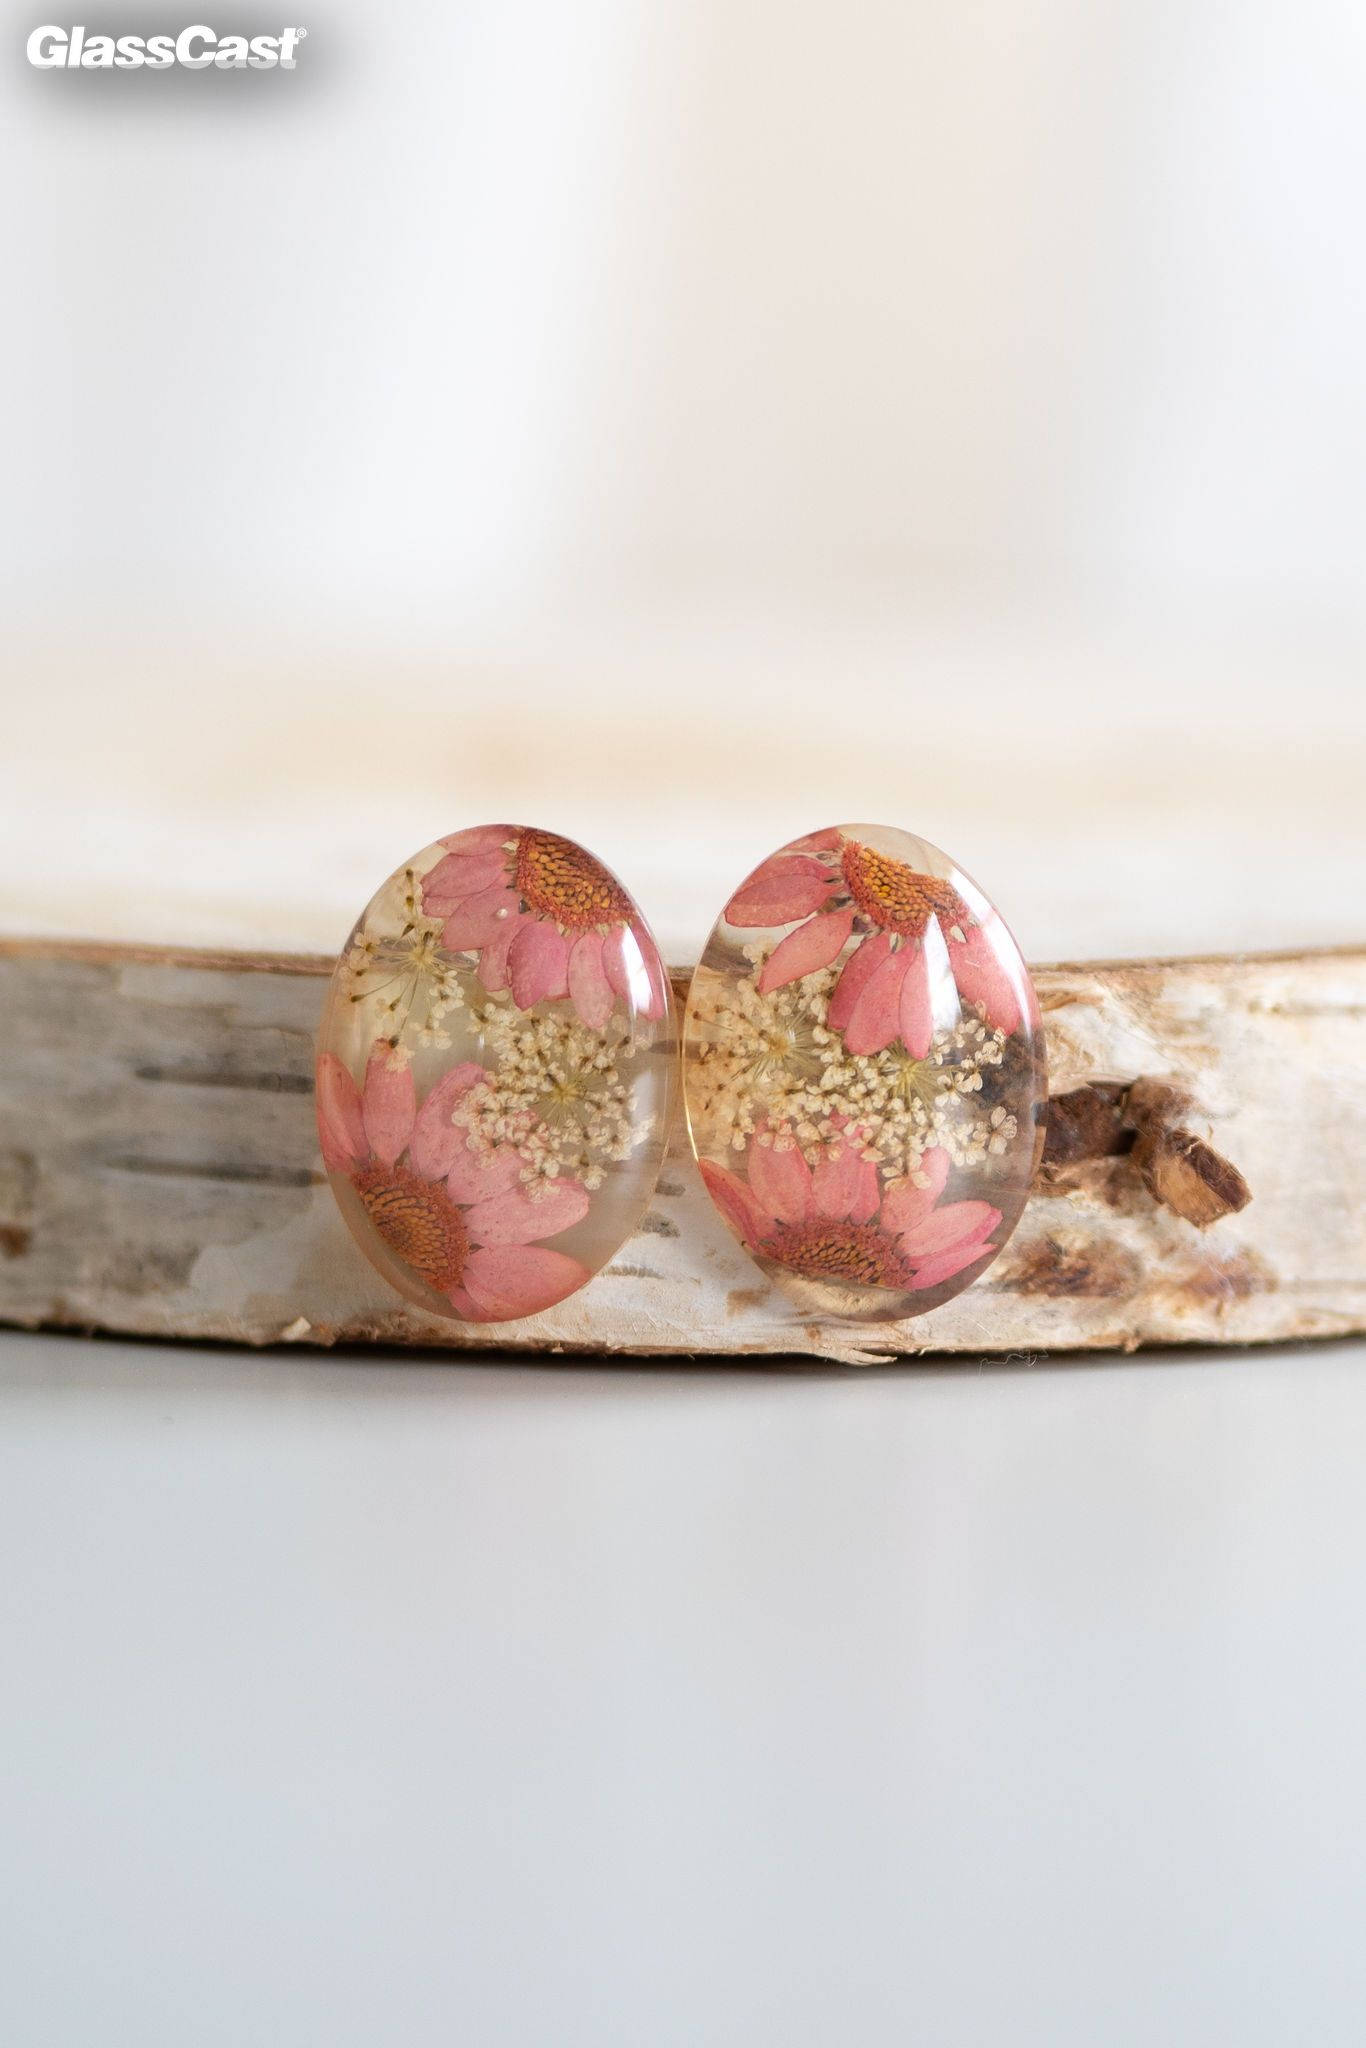 Resin Jewellery Clearly Creative Kits with Paige Alexander - GlassCast